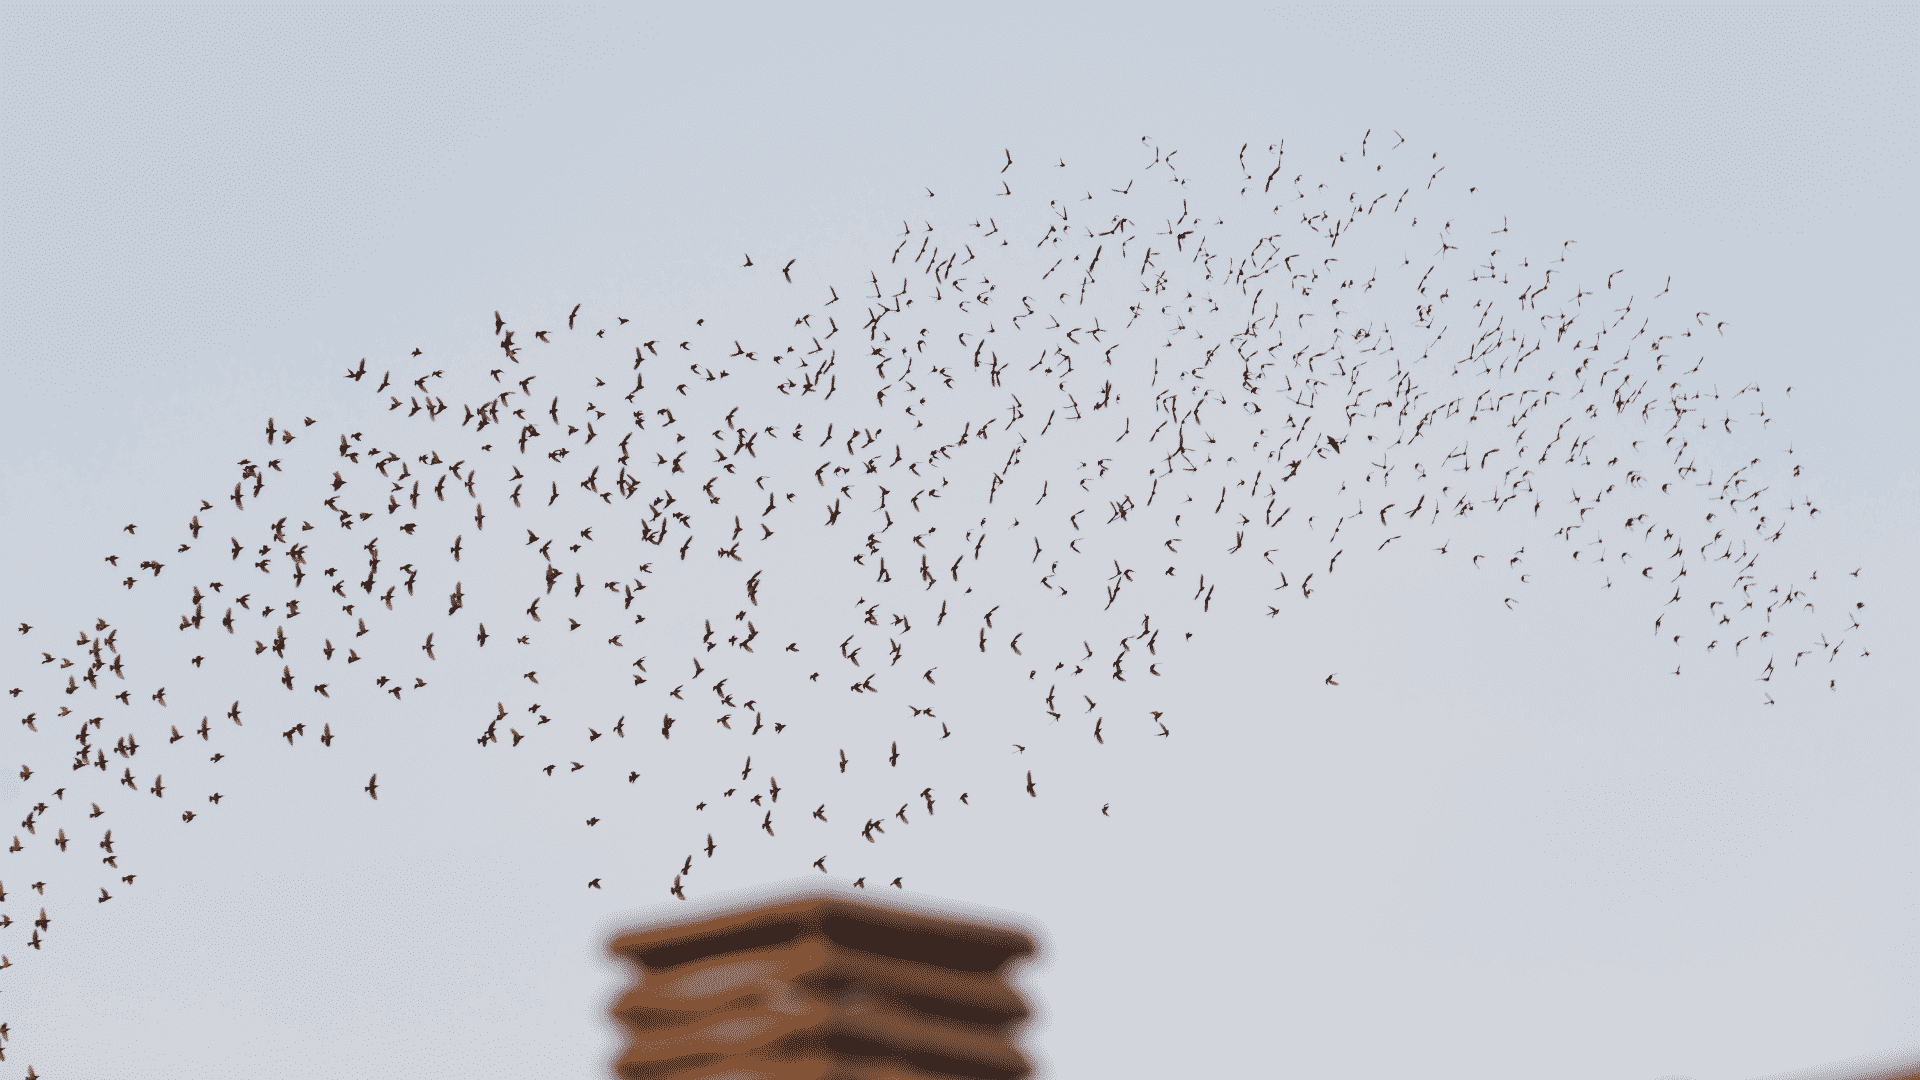 A flock of birds fly over a chimney